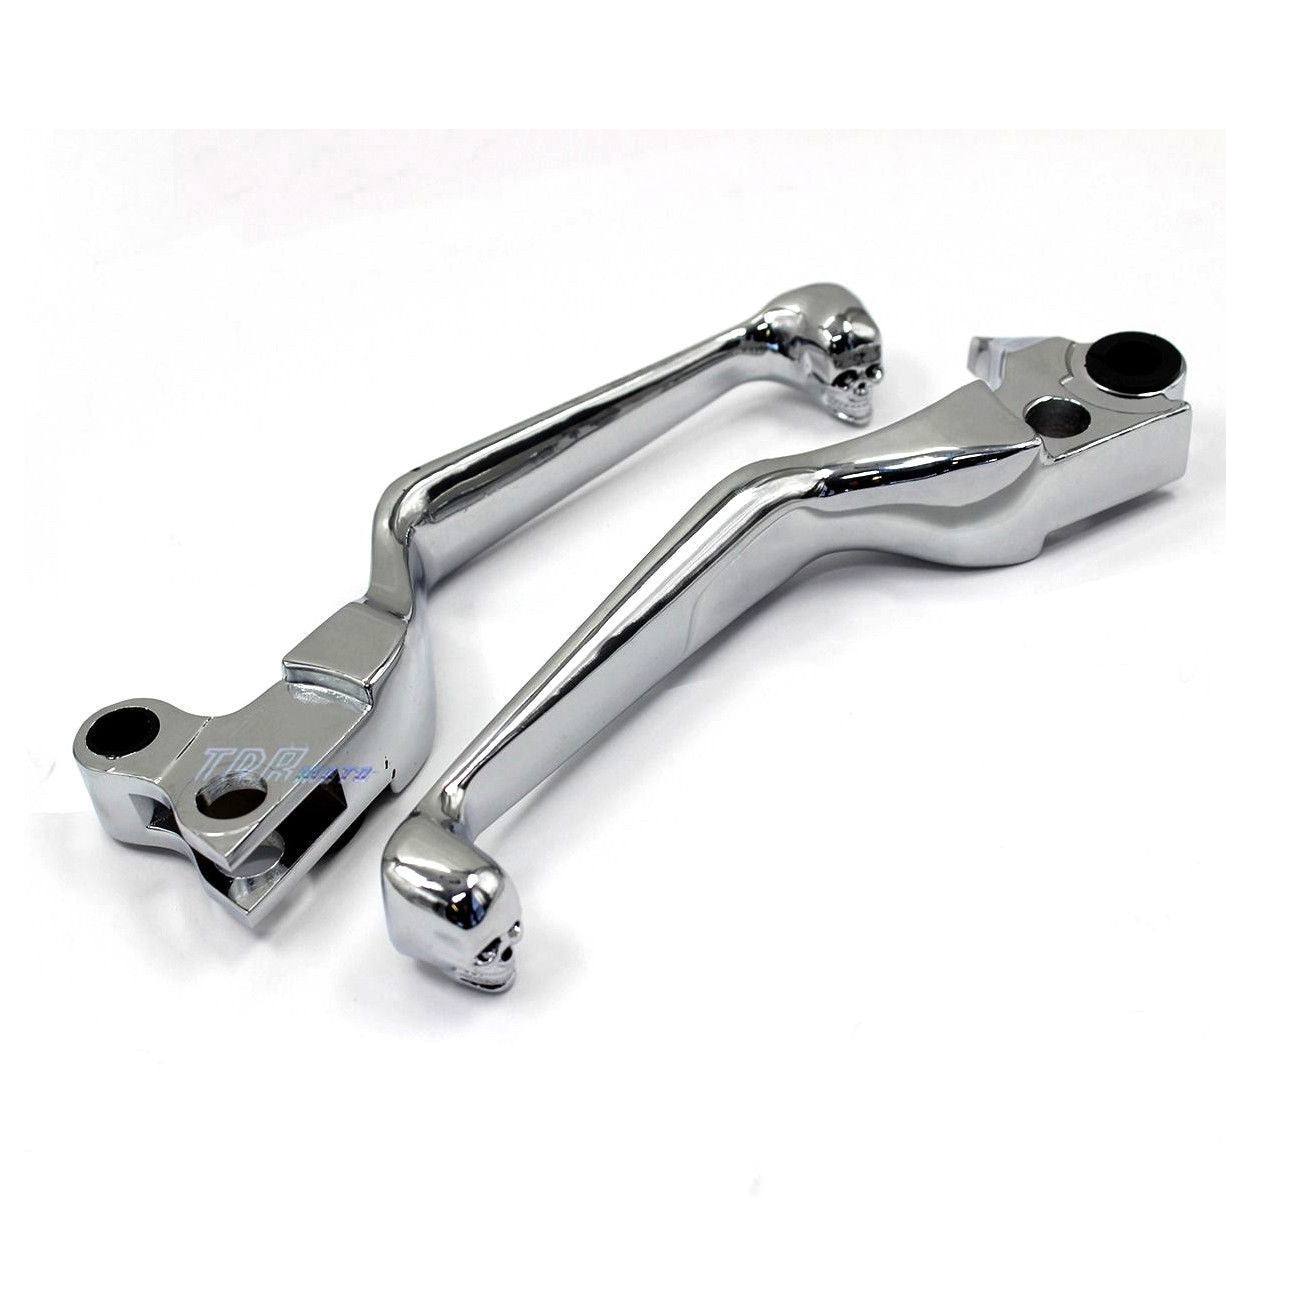 Clutch Brake Chrome Lever Levers for Harley Davidson Softail